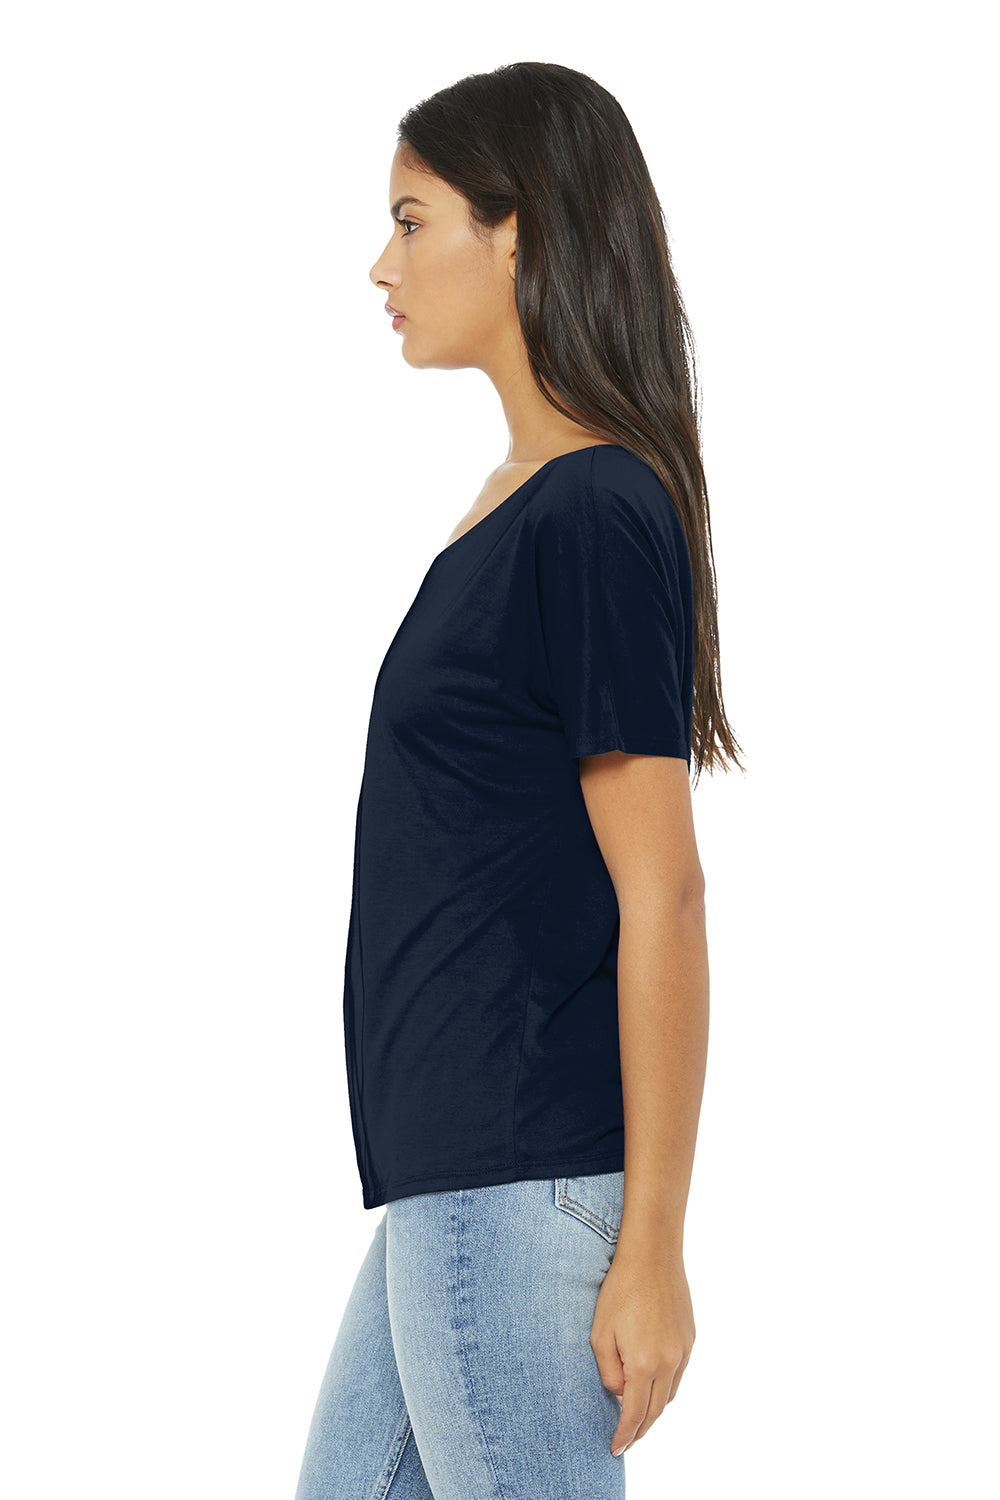 Bella + Canvas BC8816/8816 Womens Slouchy Short Sleeve Wide Neck T-Shirt Midnight Blue Model Side